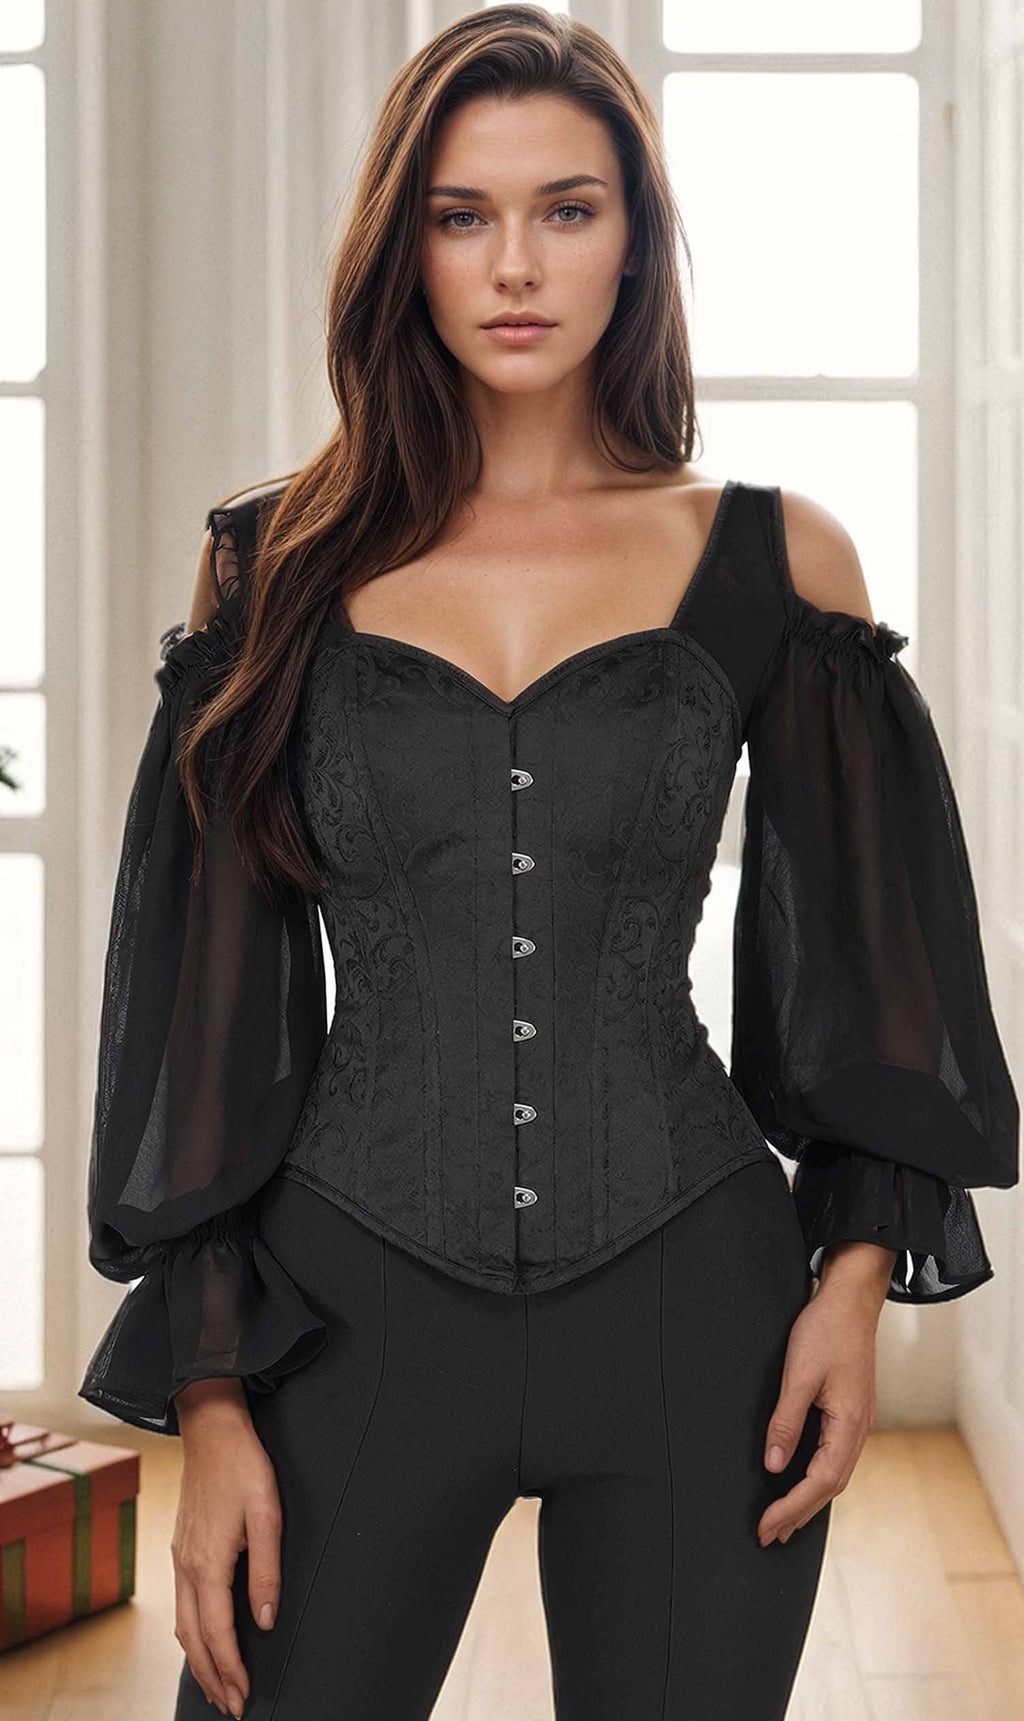 Get a new look with bespoke overbust corset – Bunny Corset